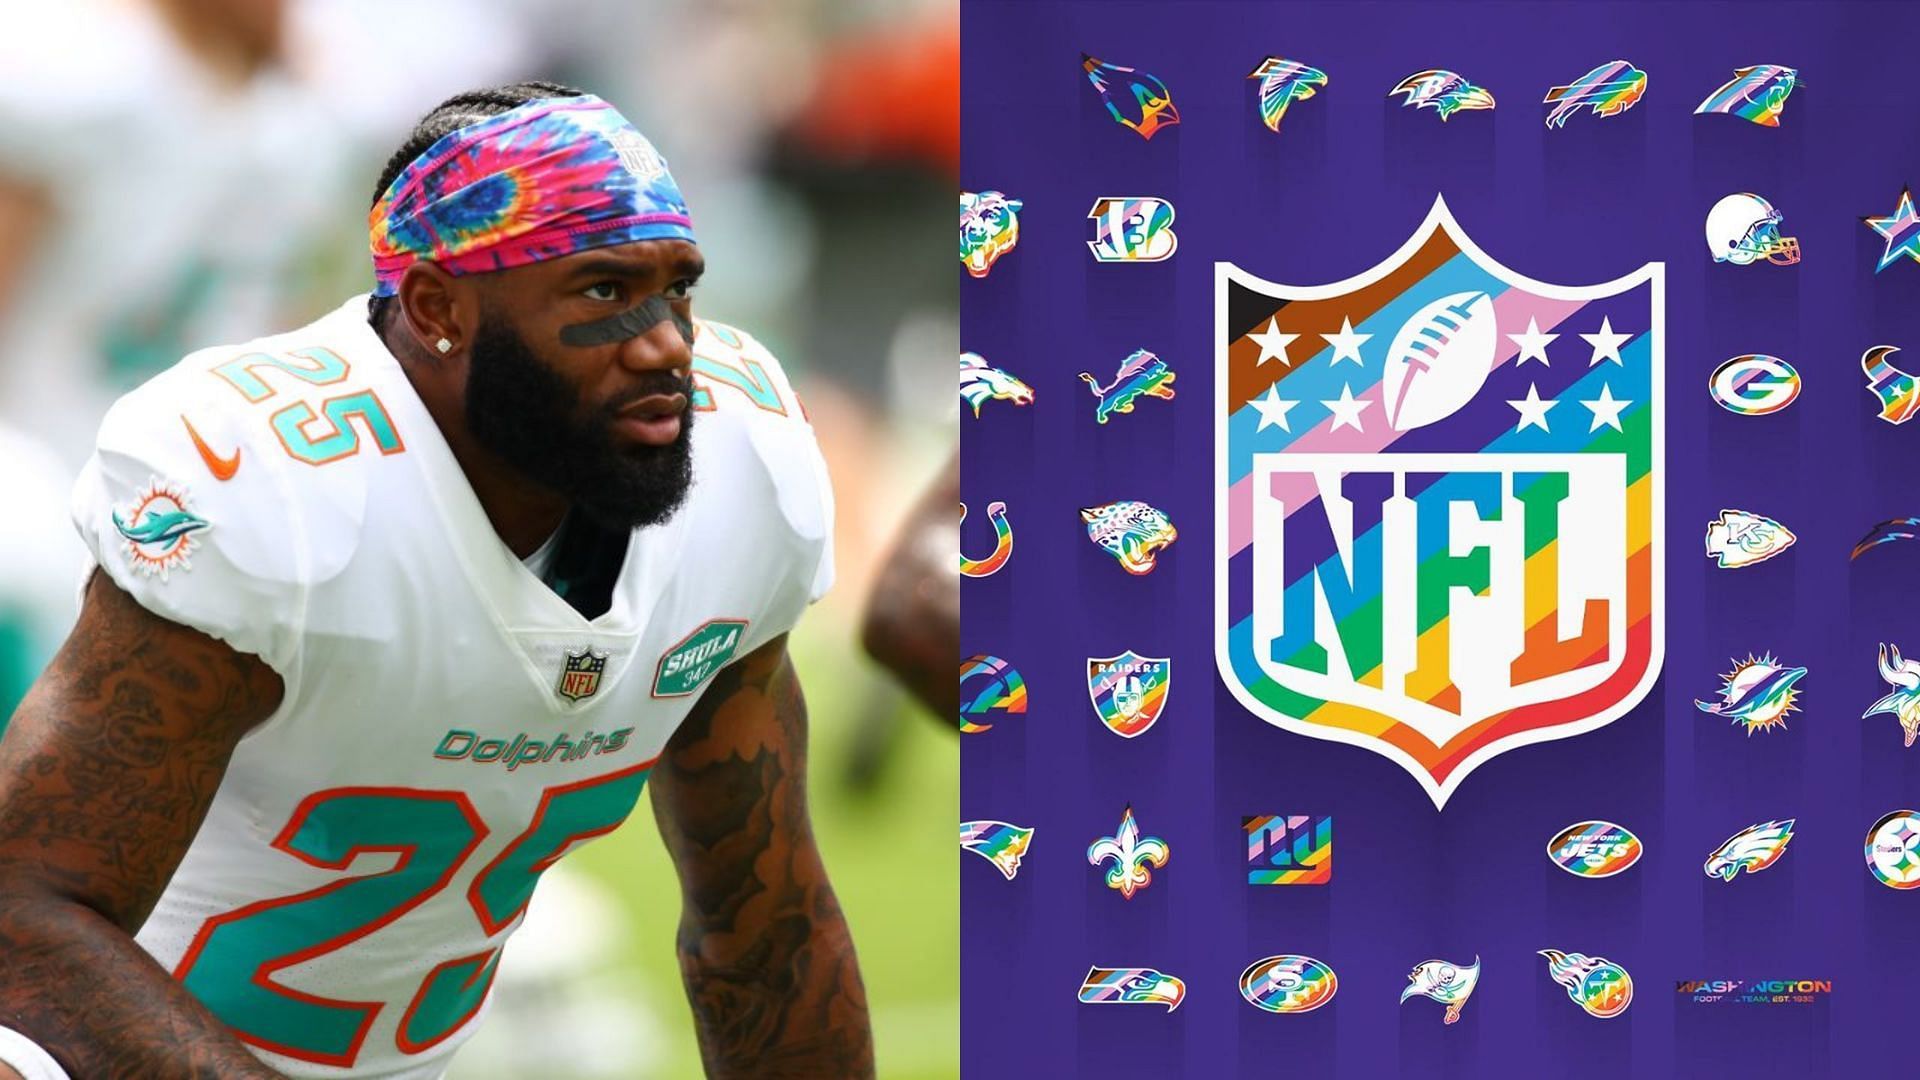 Why is the NFL wearing tie-dye and rainbow colours?